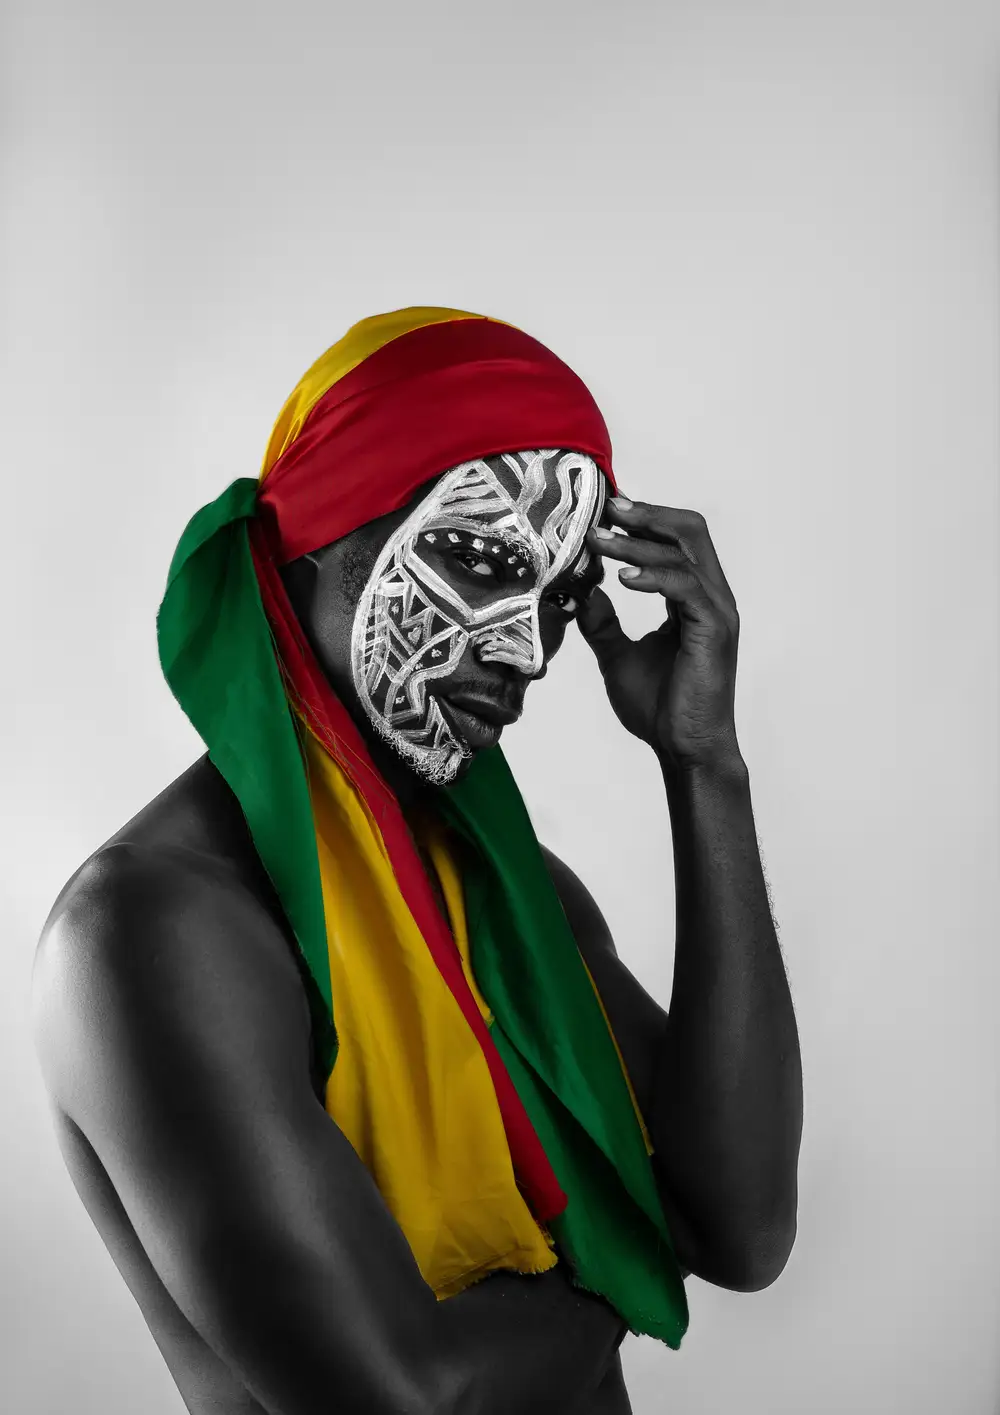 Man with face painting tying a Ghana flag.